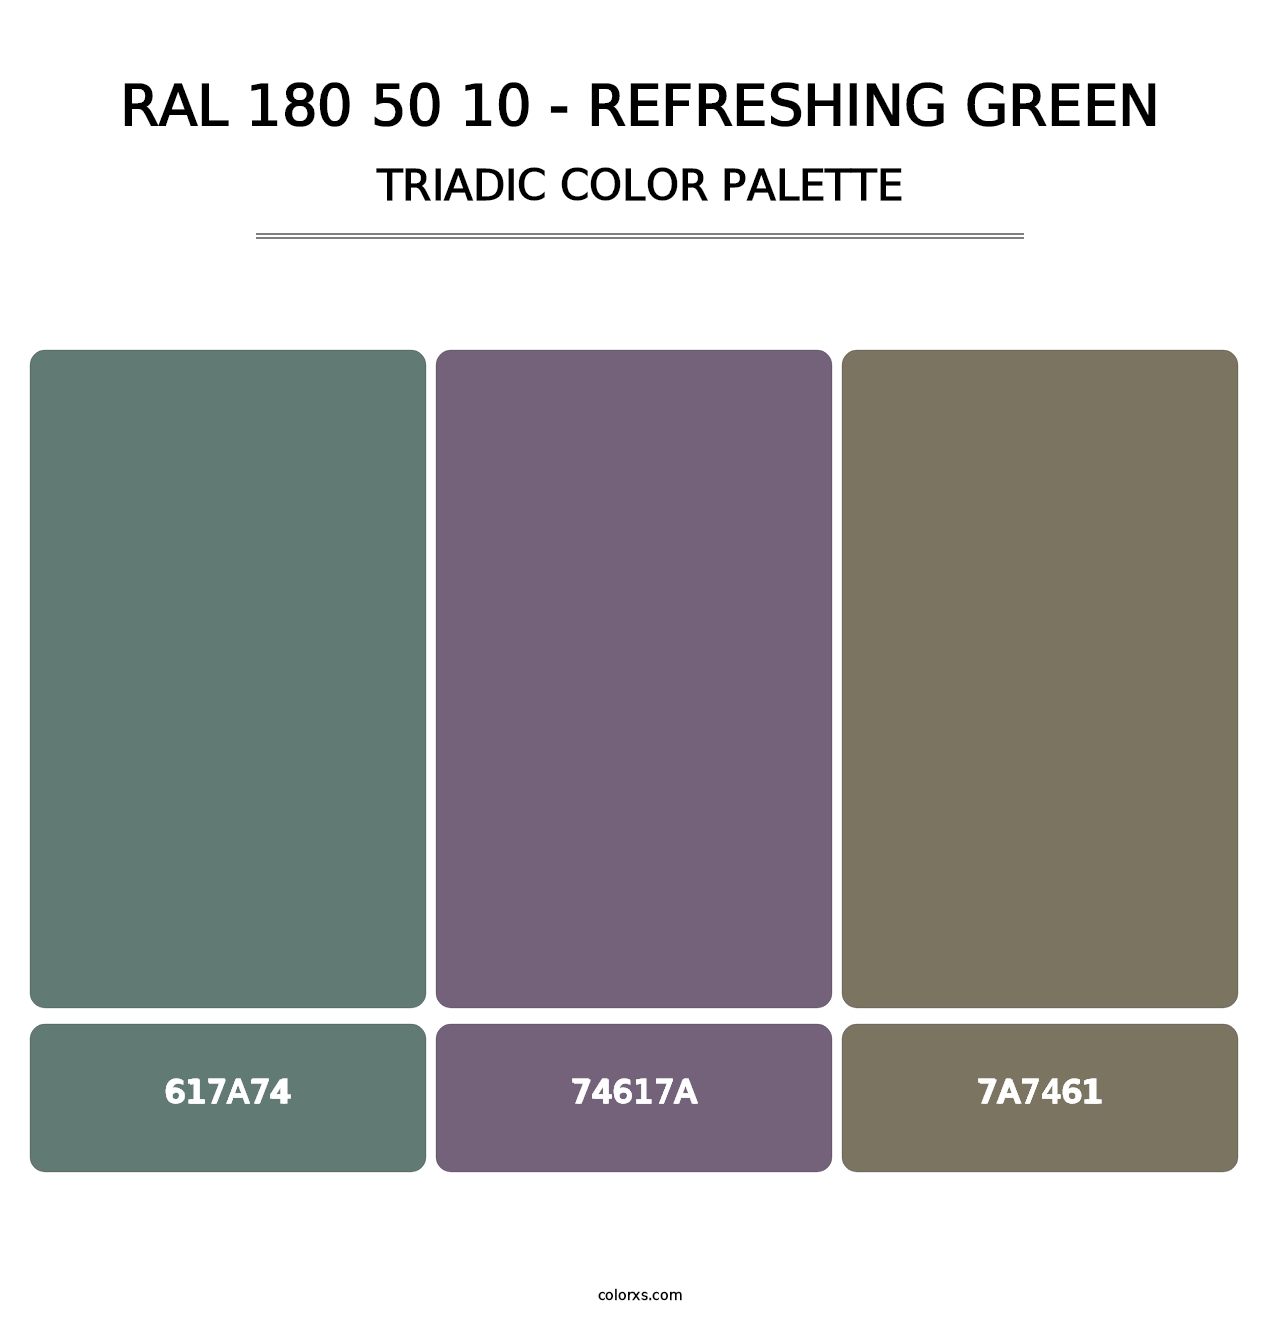 RAL 180 50 10 - Refreshing Green - Triadic Color Palette